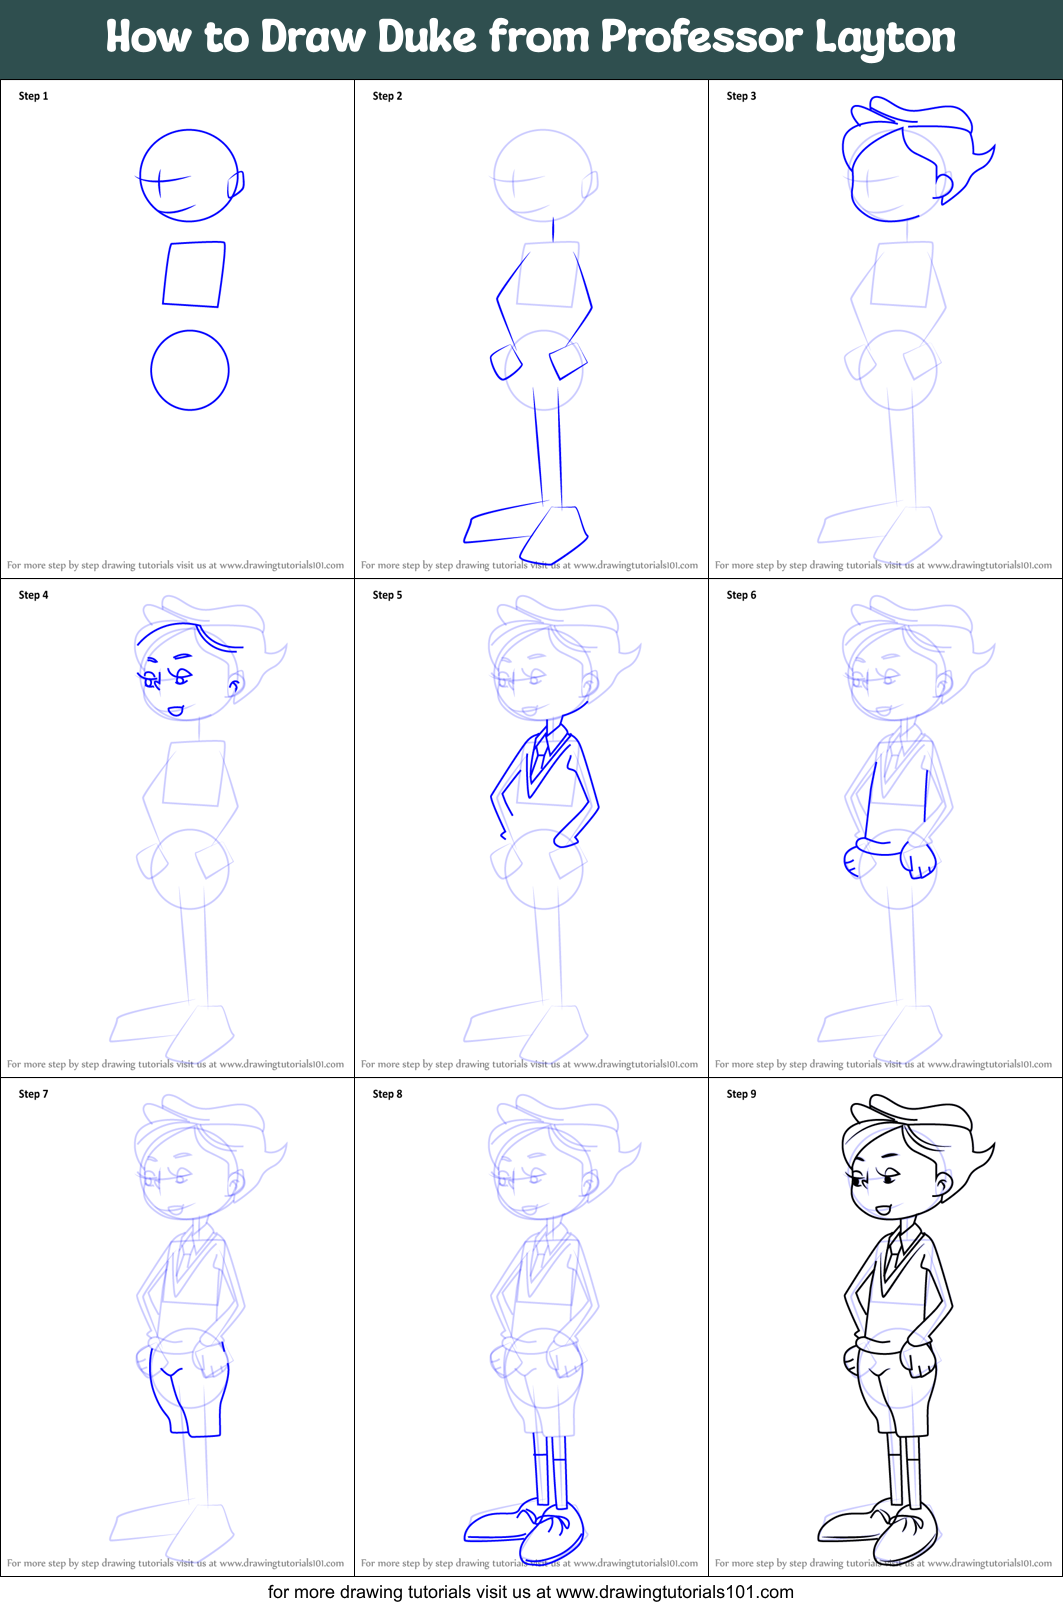 How to Draw Duke from Professor Layton printable step by step drawing